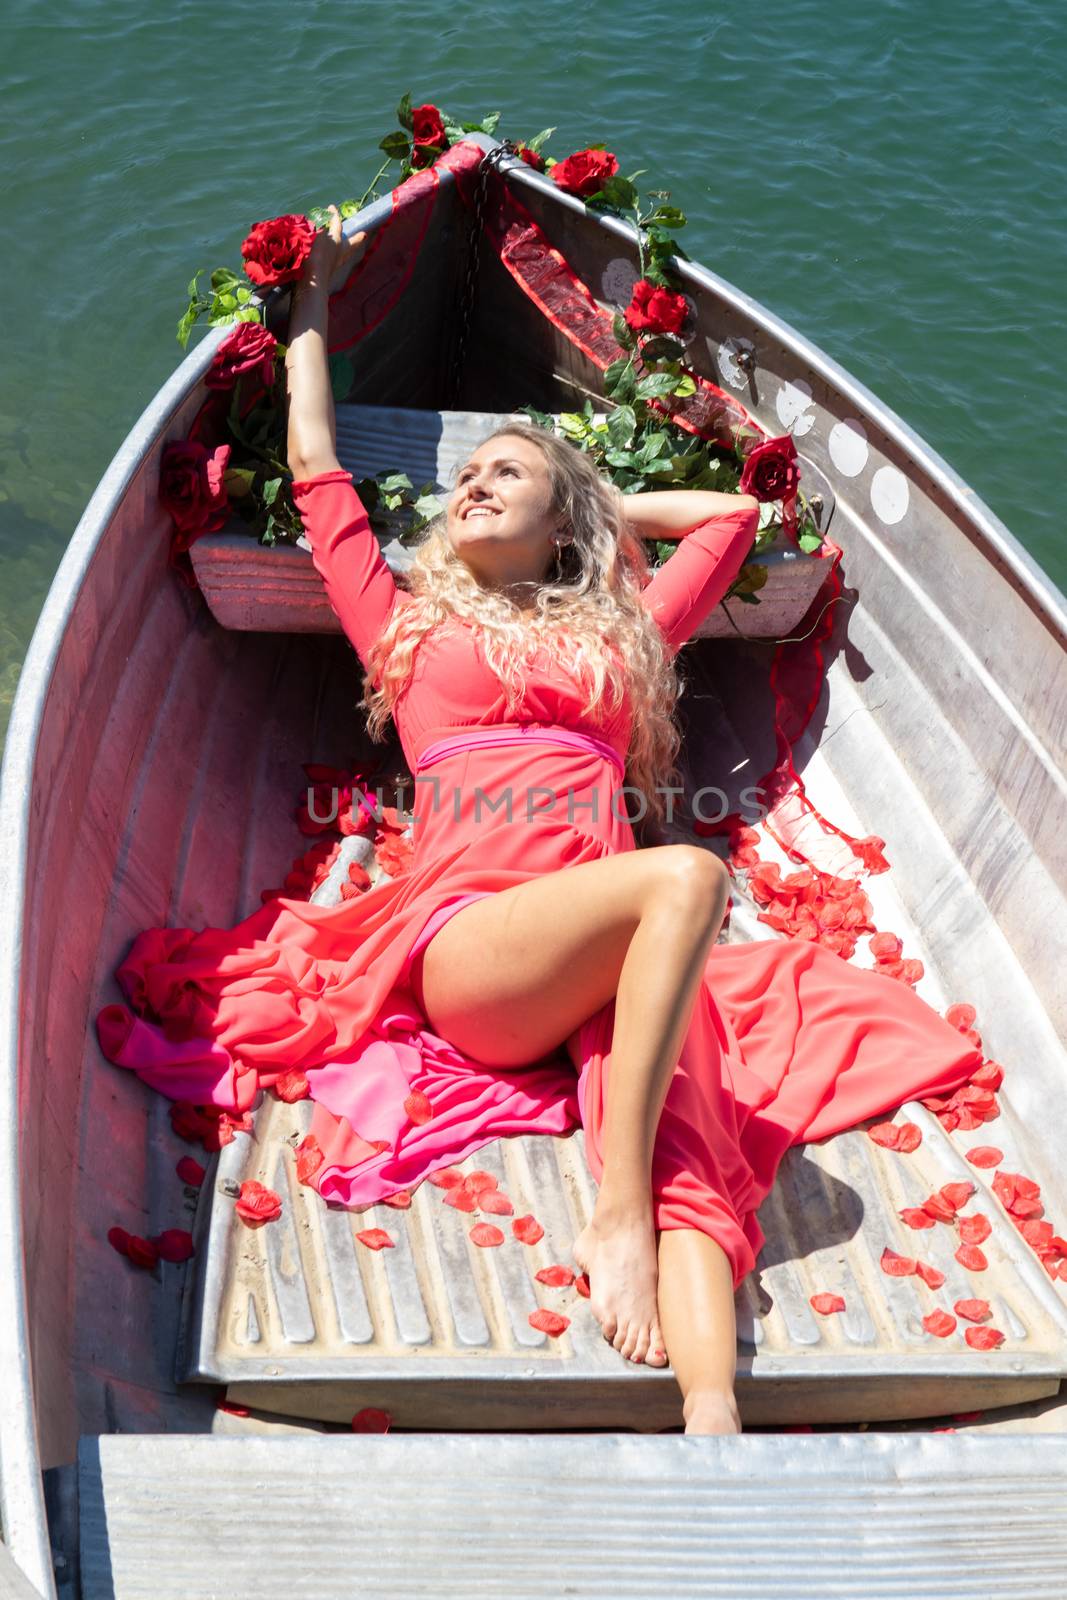 Life style woman with red dress and roses